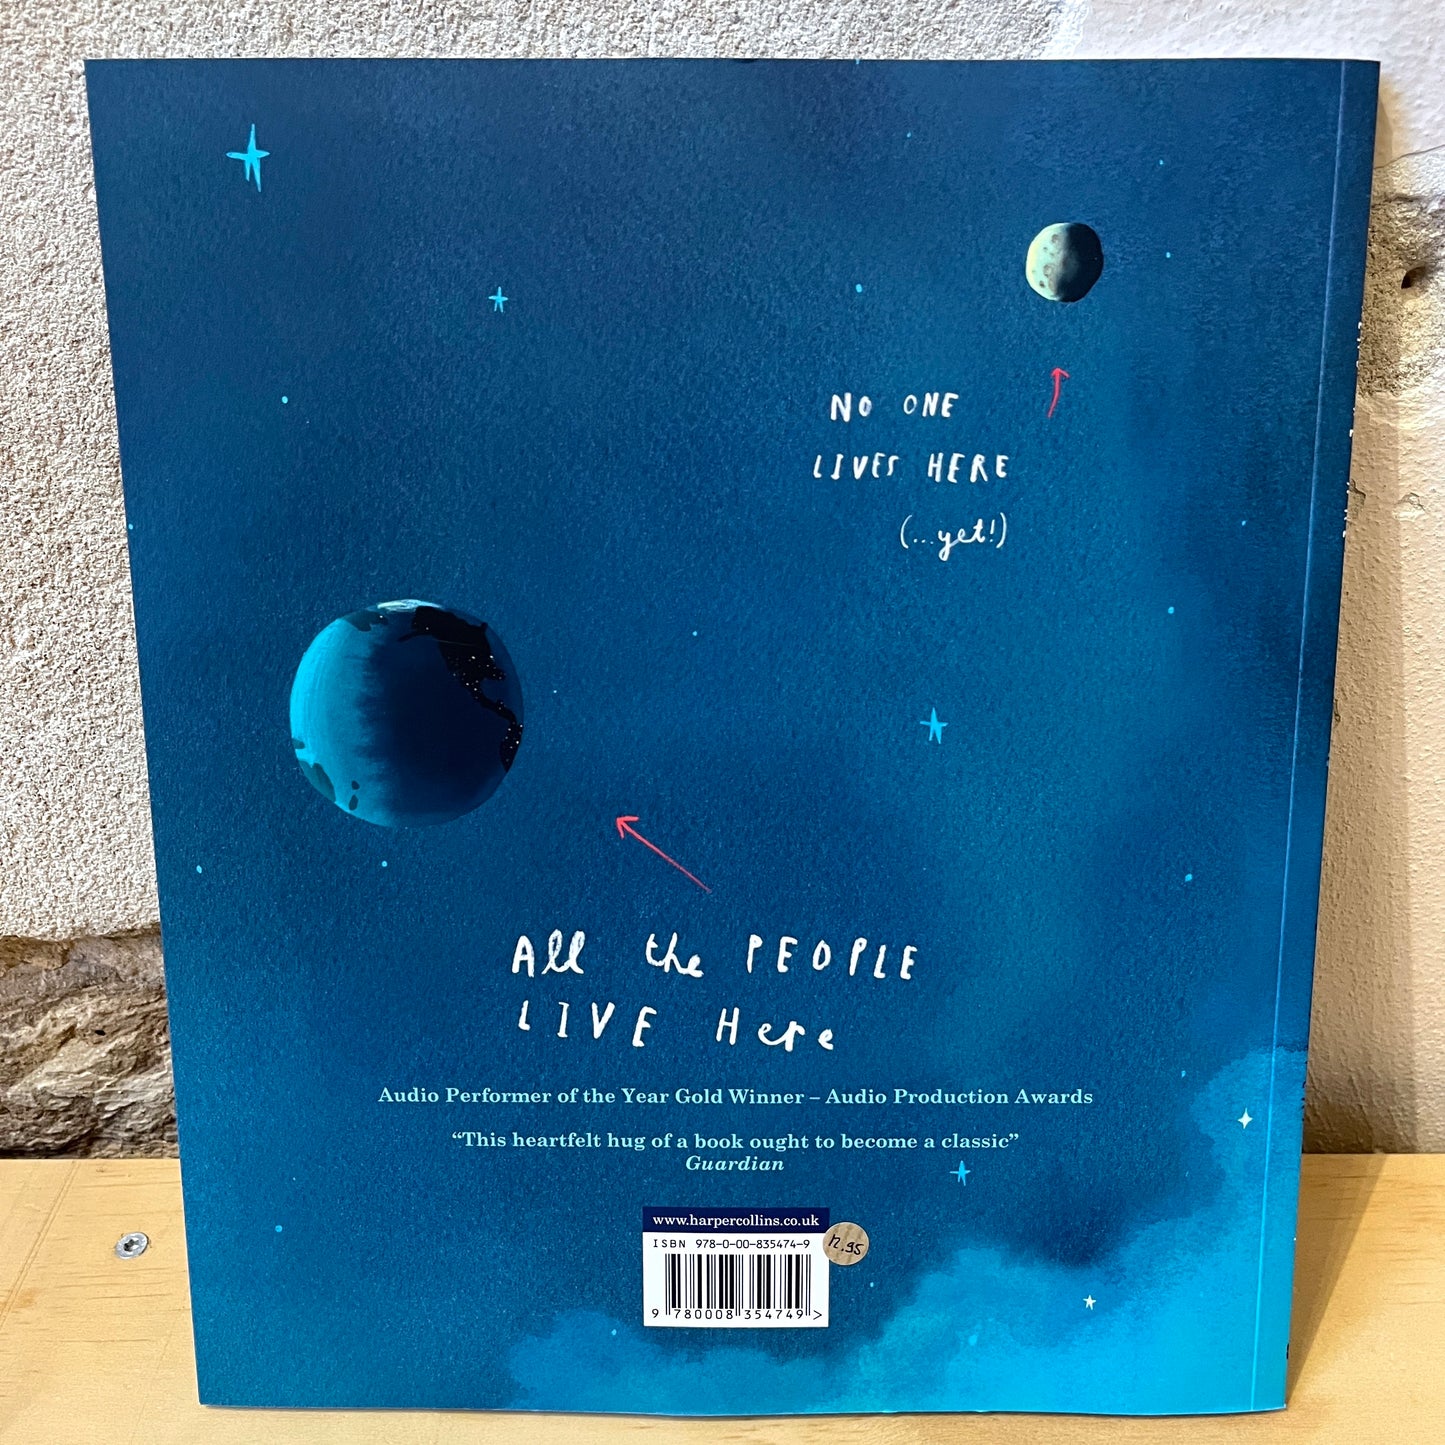 Here We Are – Oliver Jeffers